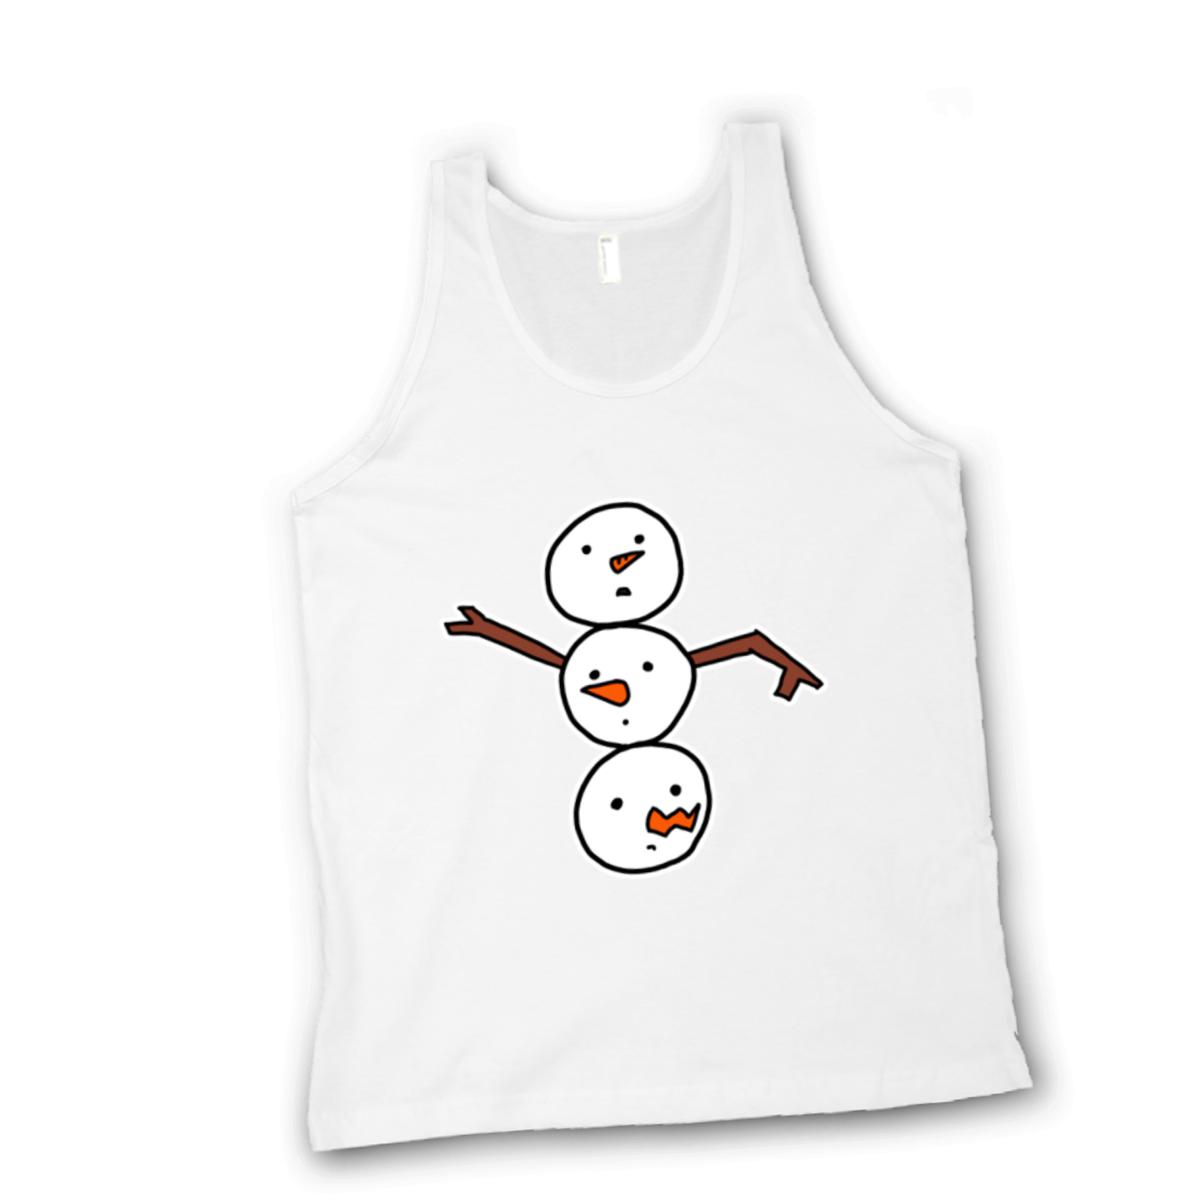 Snowman All Heads Unisex Tank Top Extra Small white